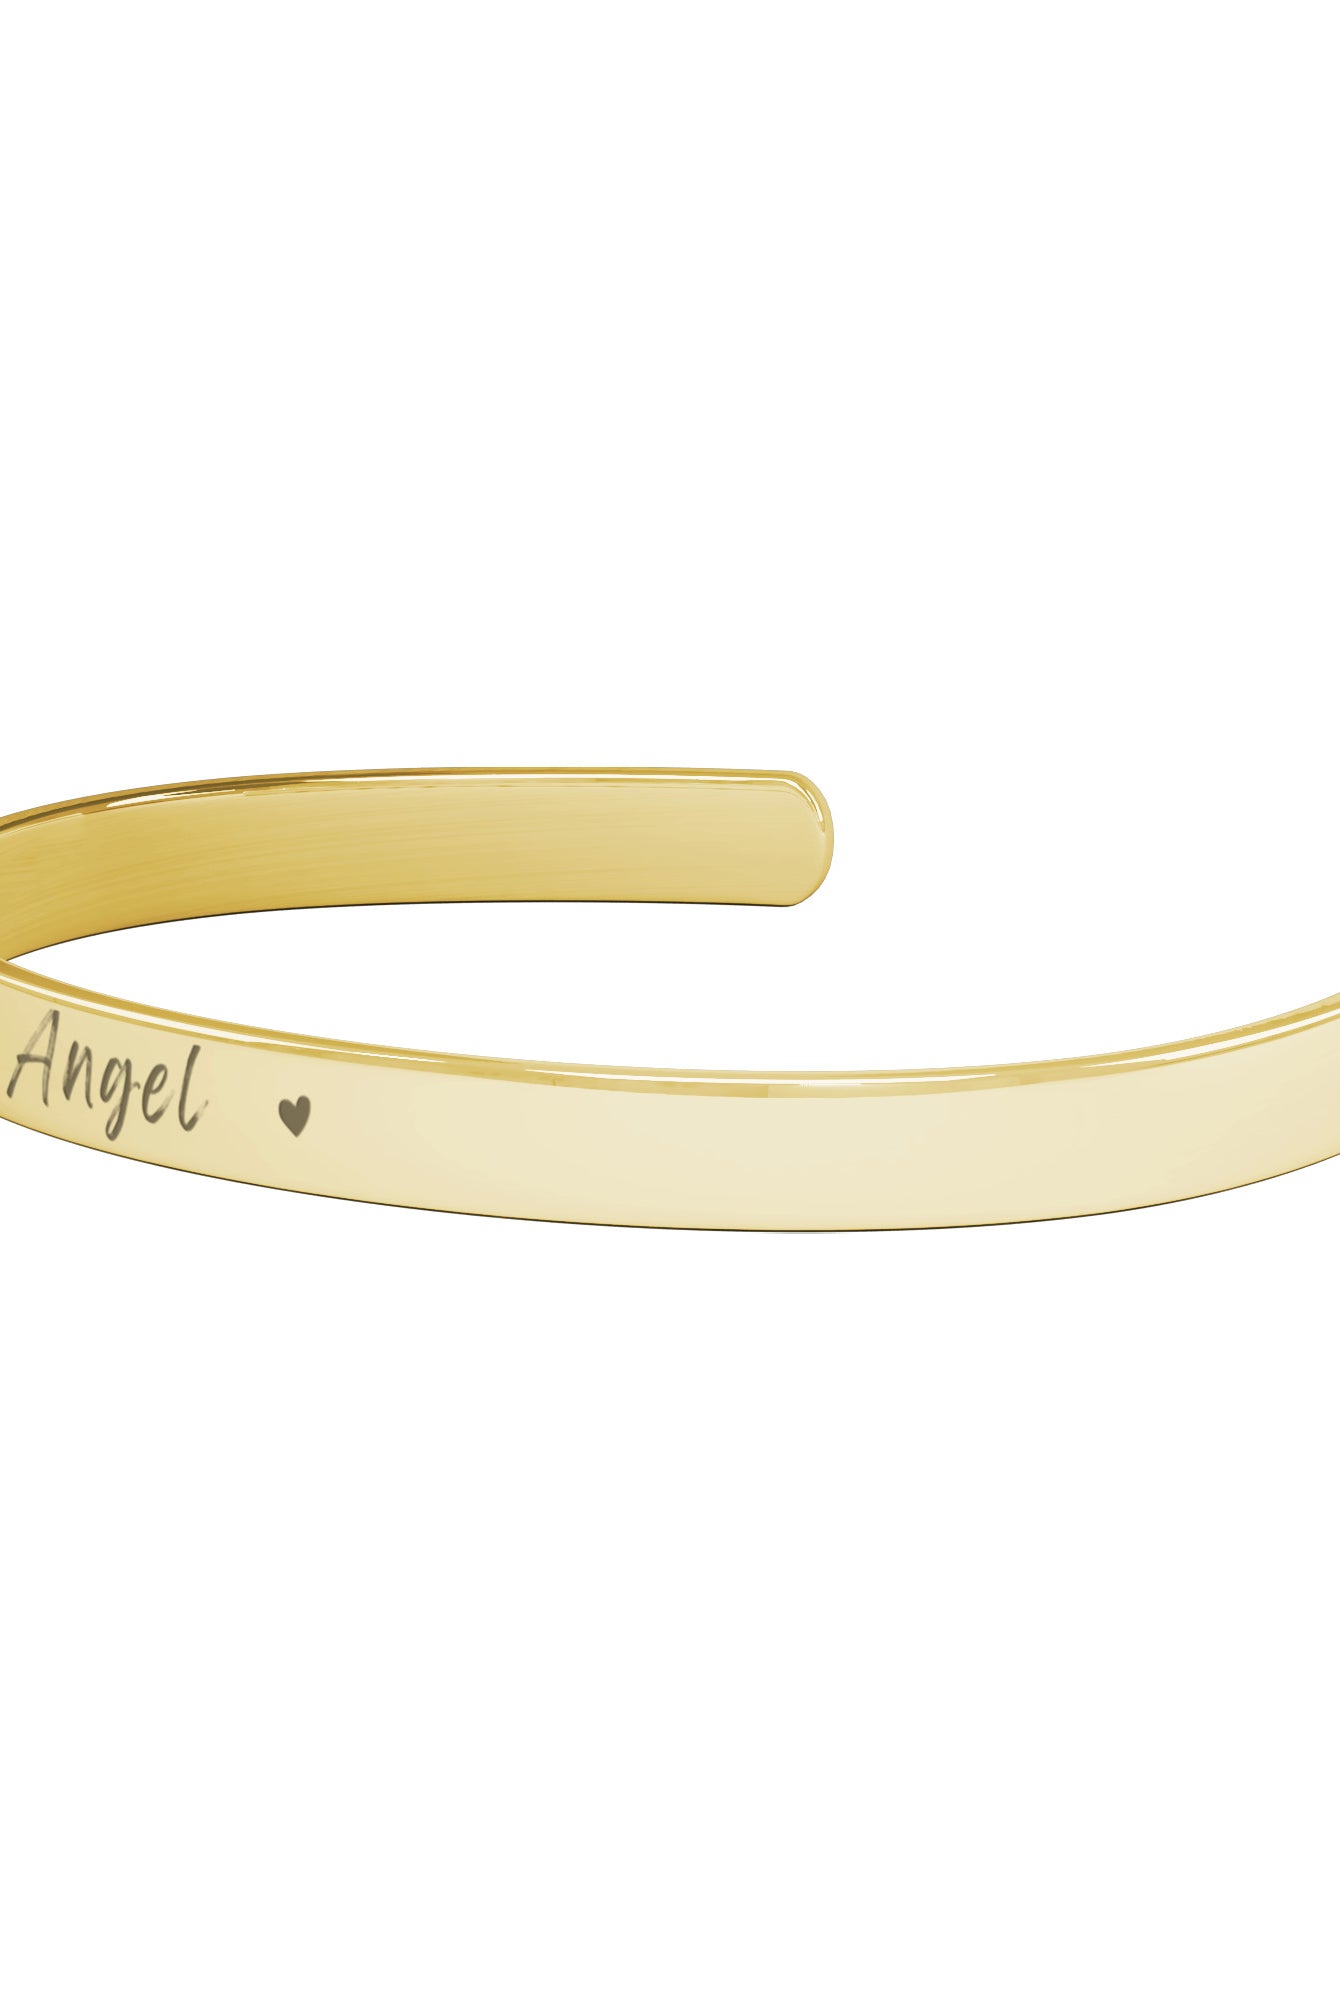 Gold Cuff Bracelet with the word "Angel" engraved in the front.  The inside reads, "I love you to the moon and back."